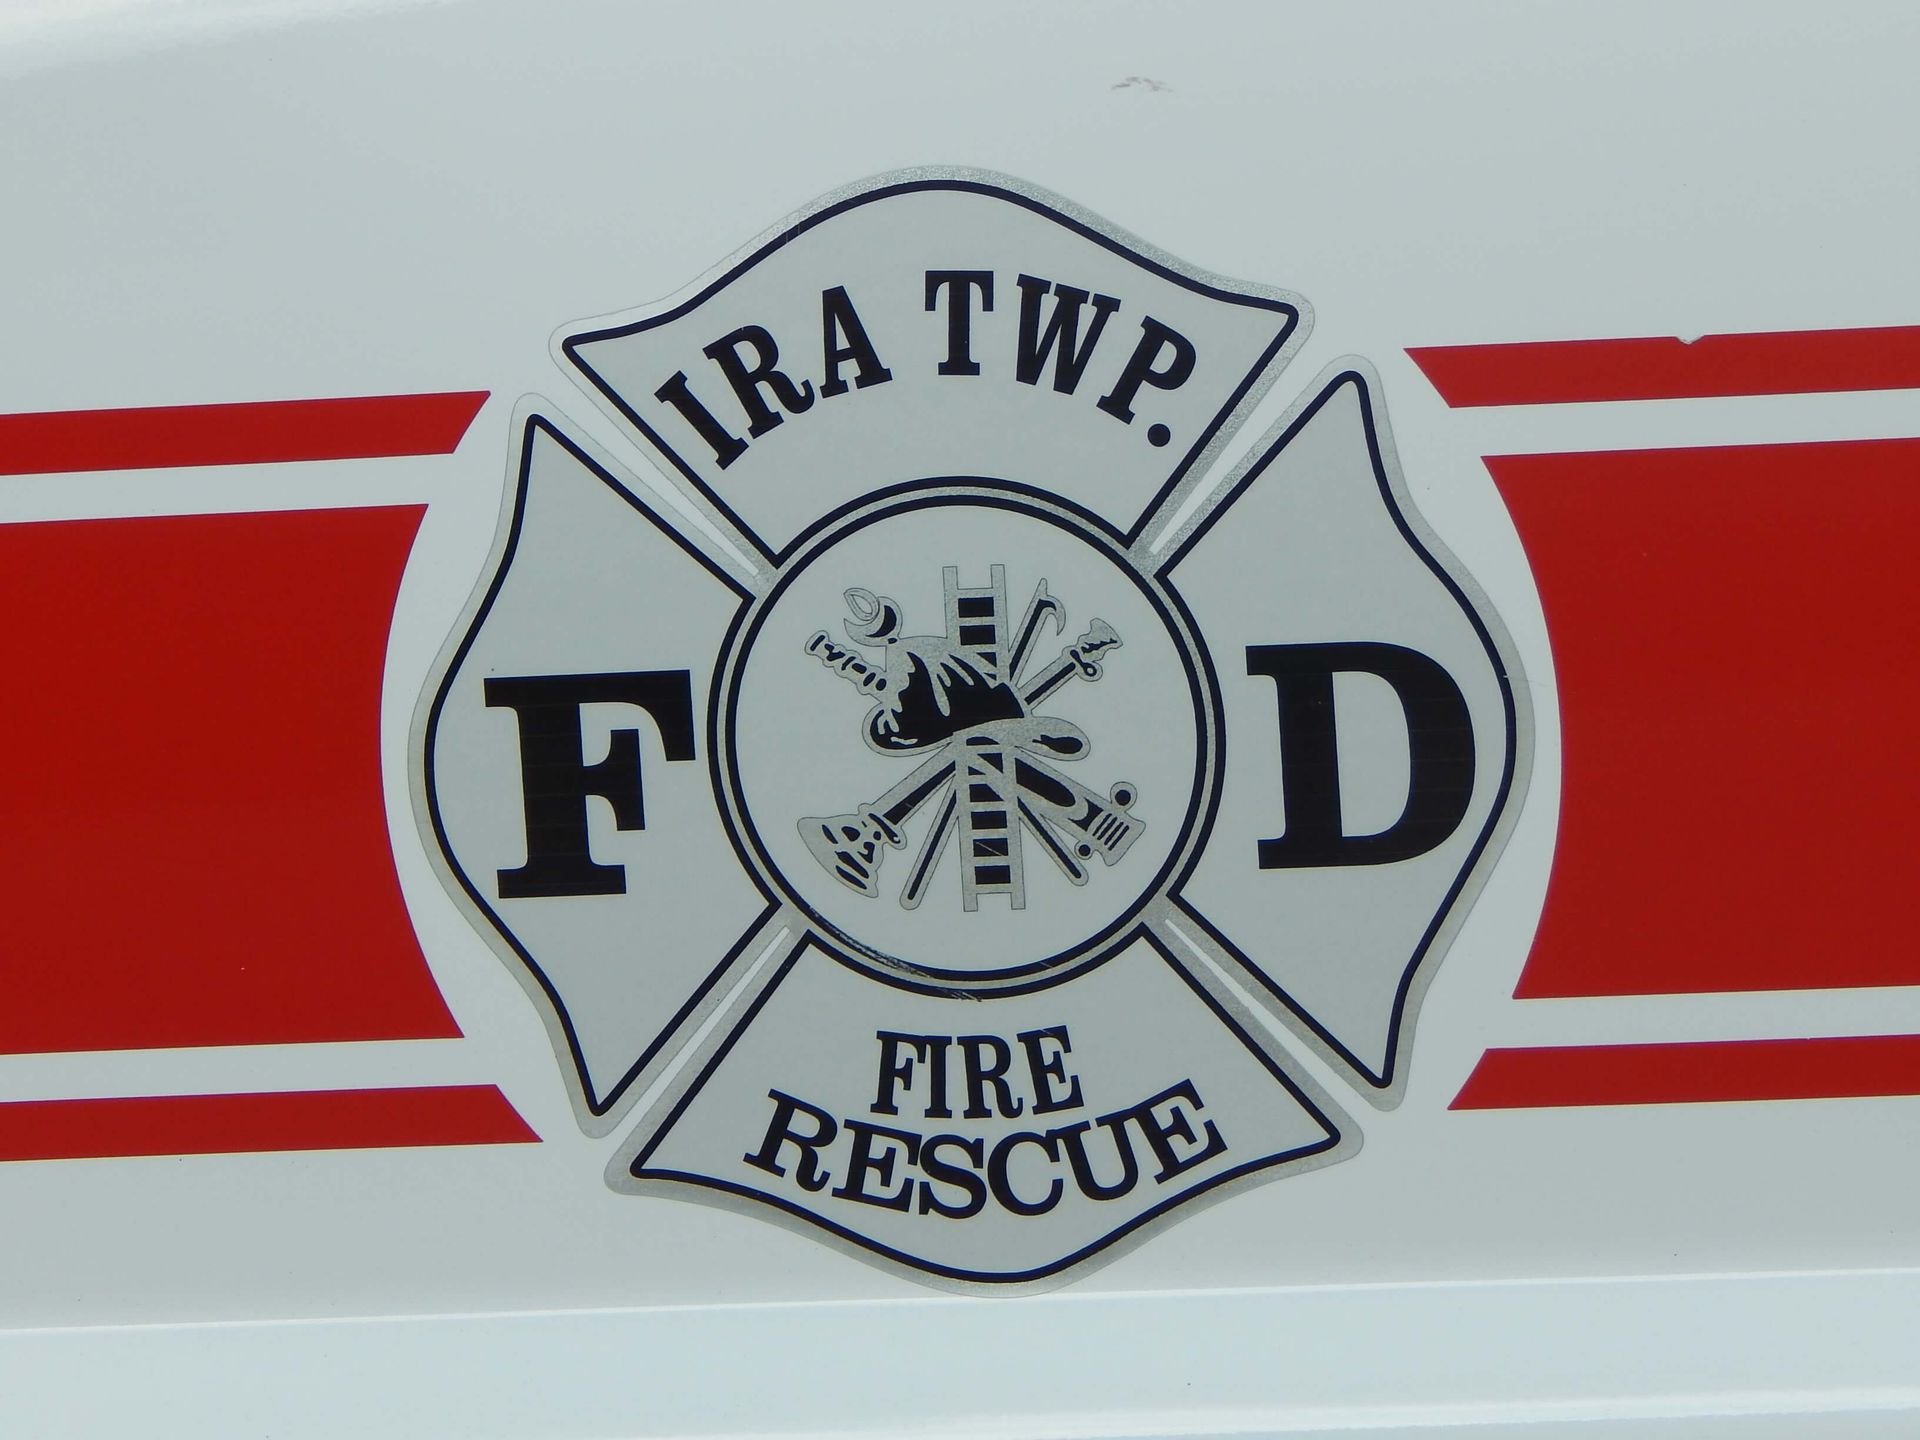 Ira Twp Fire Rescue logo on a red and white striped background.